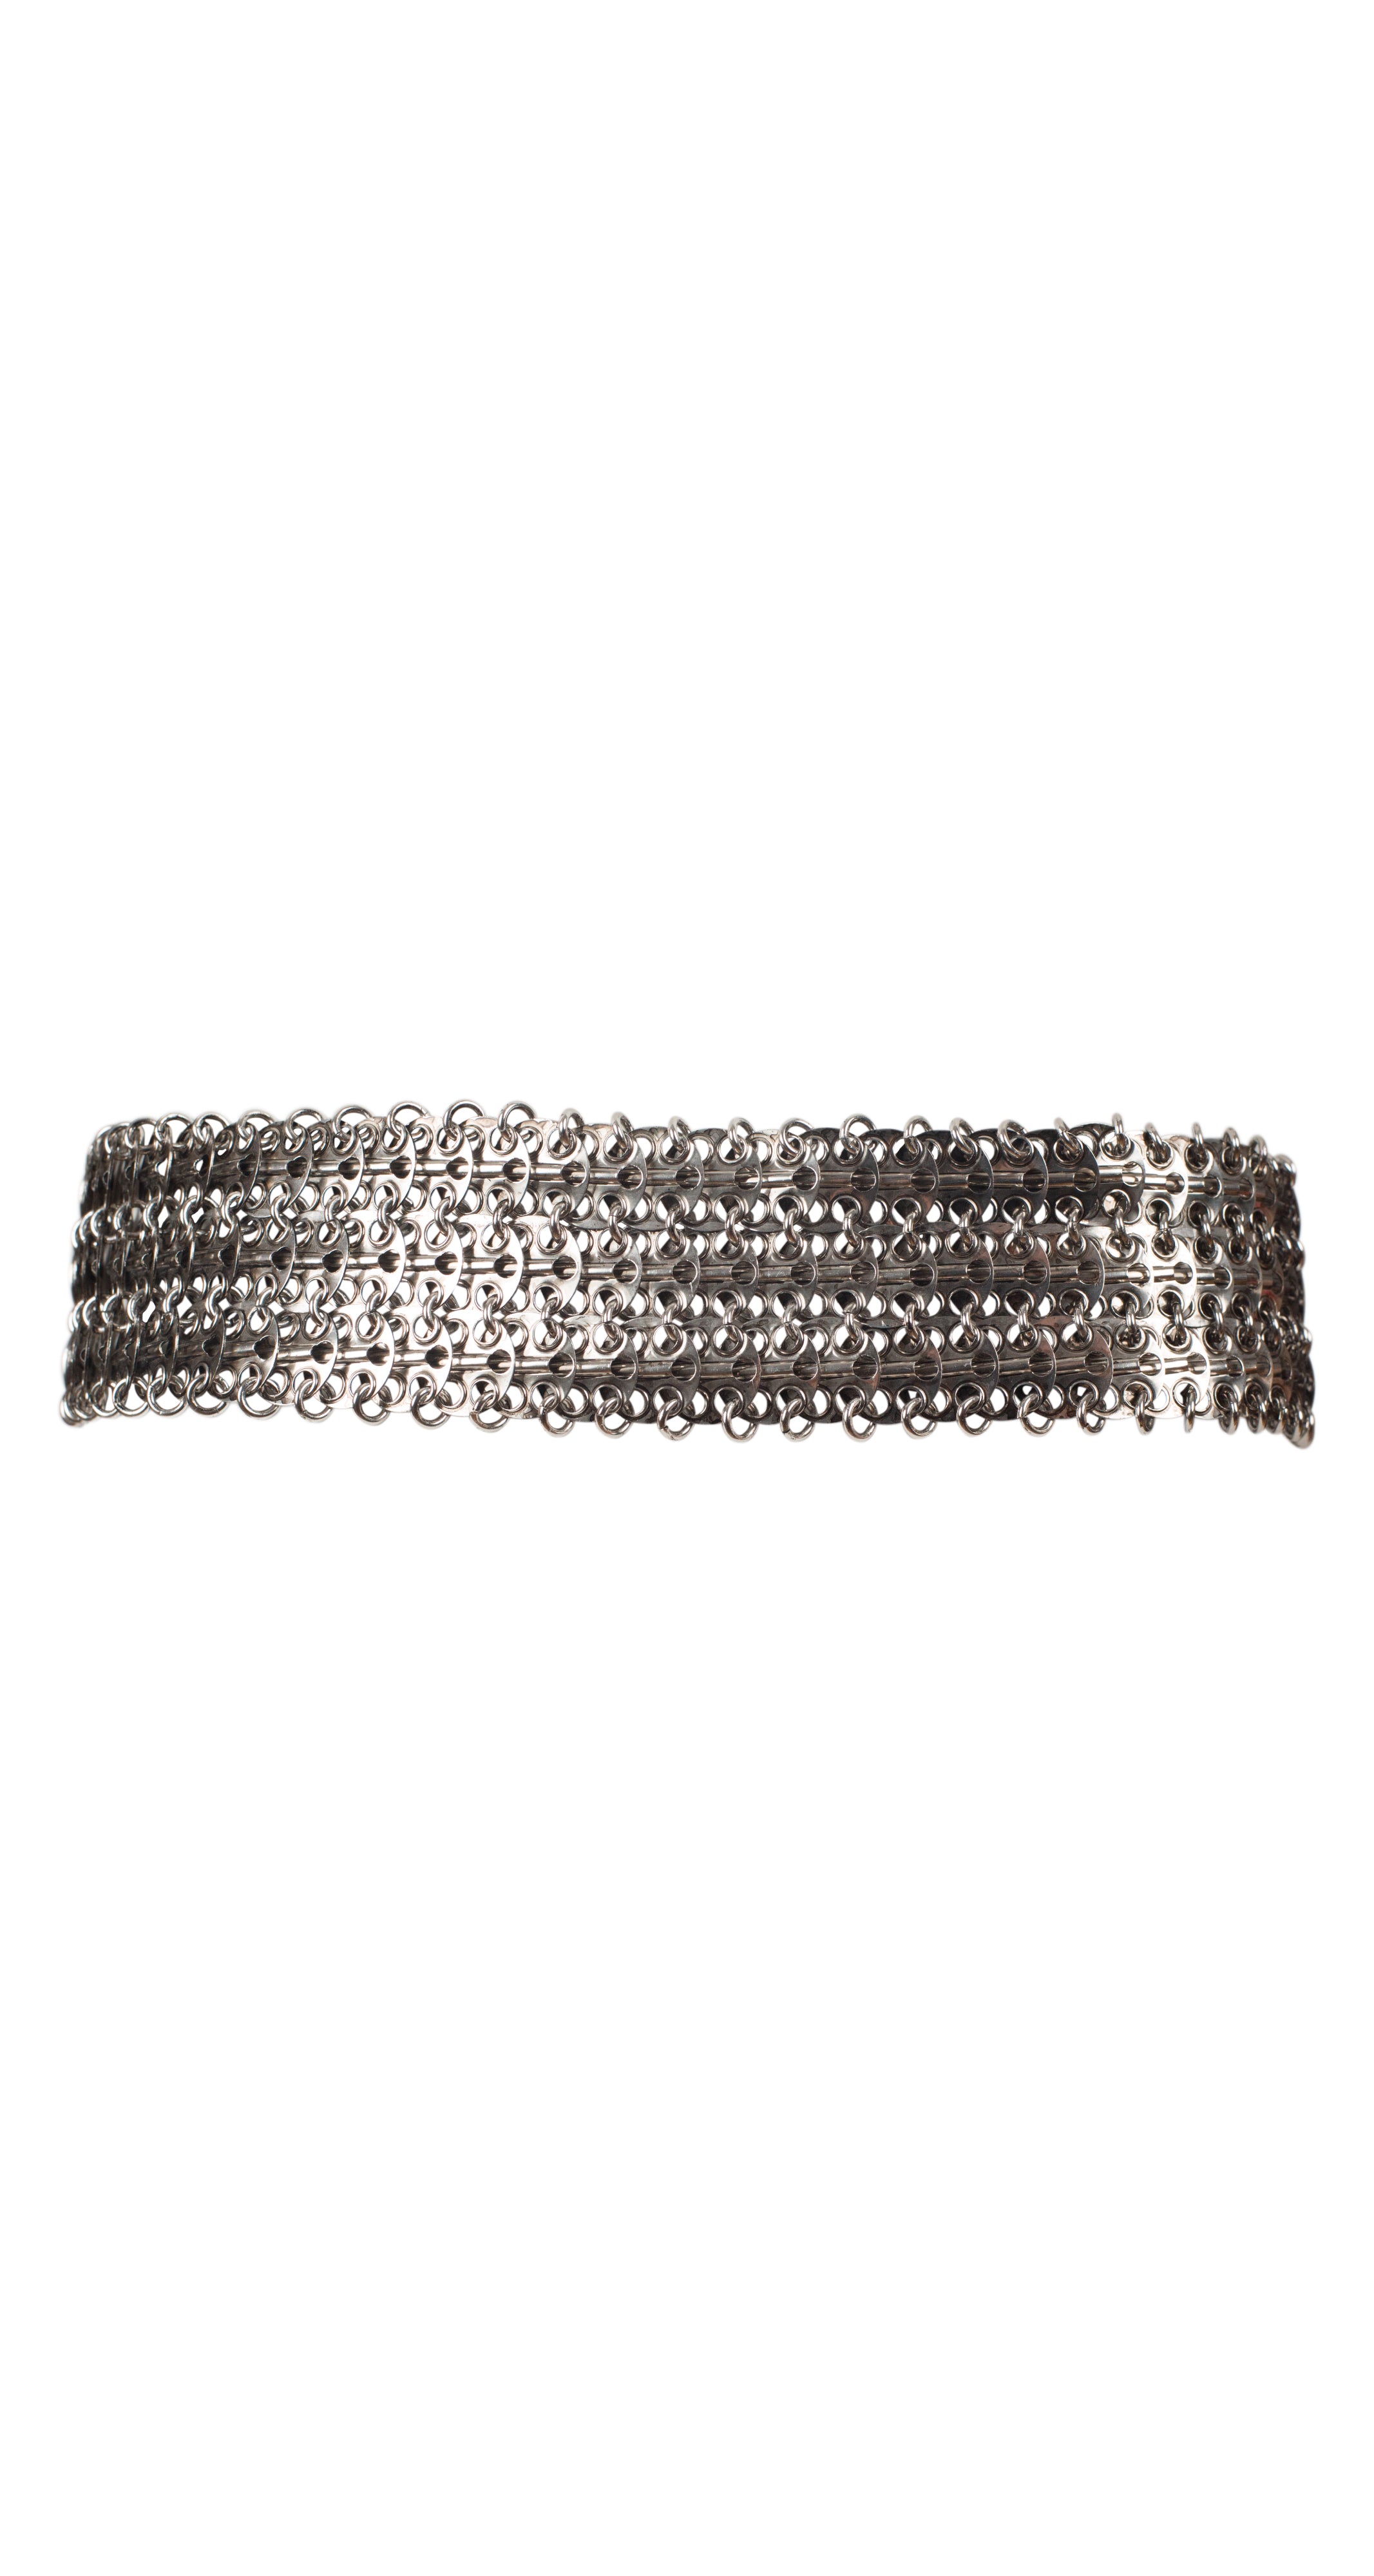 1960s Paco Rabanne Style Metal Chain Mail Belt